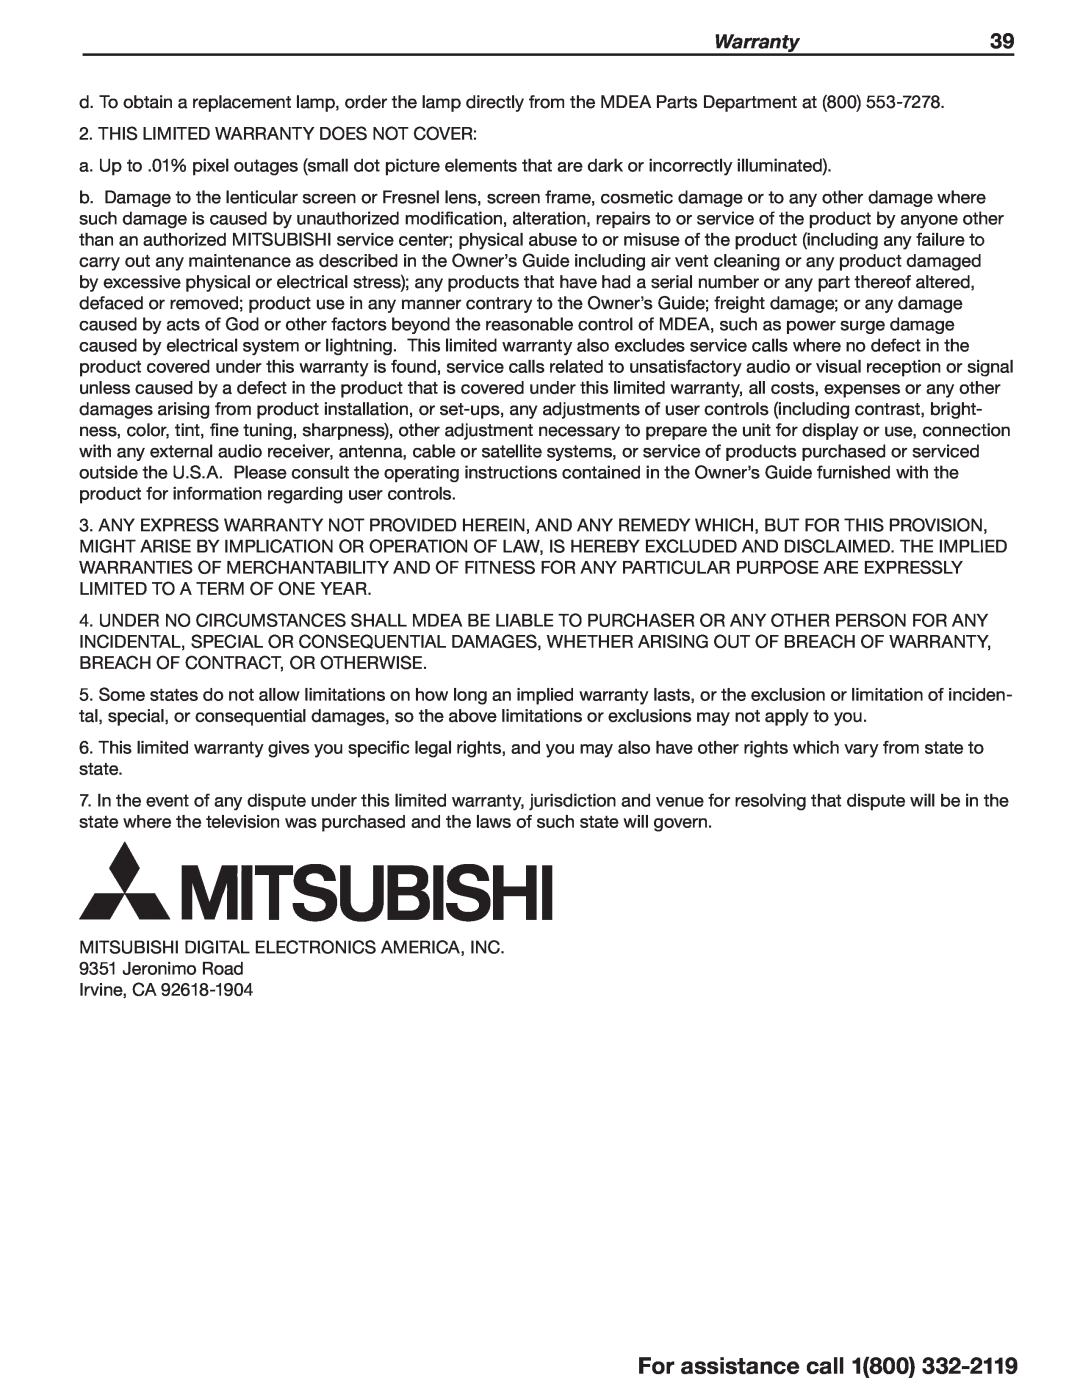 Mitsumi electronic C10 SERIES manual Warranty39, For assistance call 